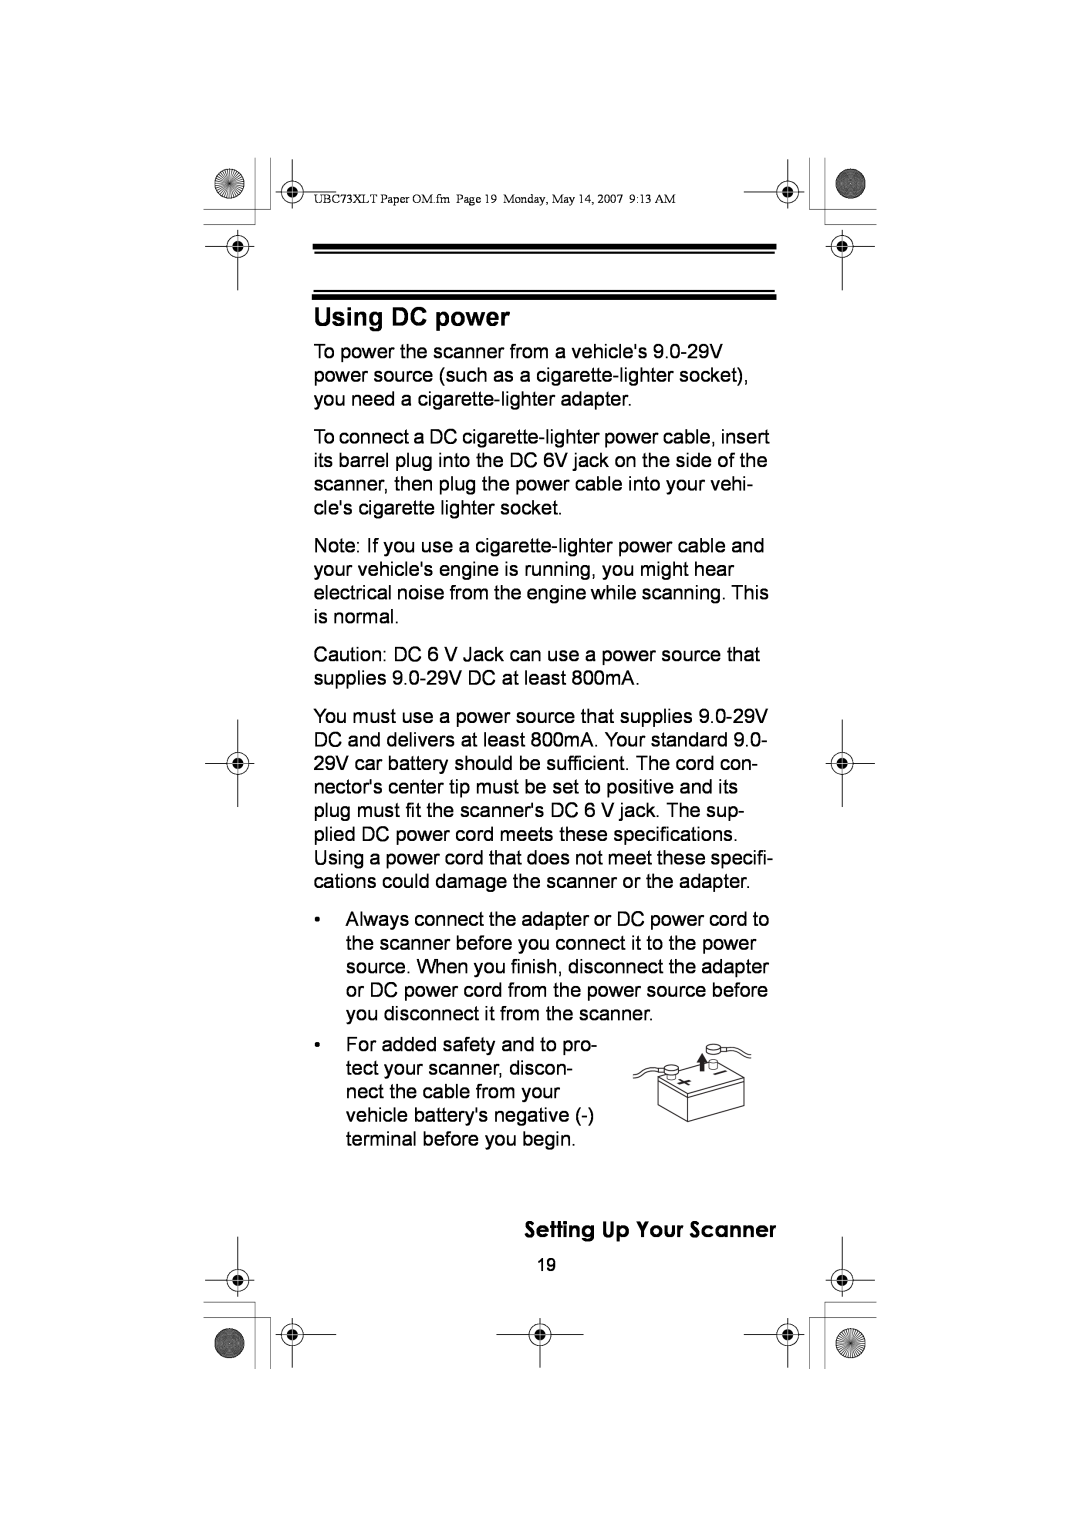 Uniden owner manual Using DC power, Setting Up Your Scanner, UBC73XLT Paper OM.fm Page 19 Monday, May 14, 2007 913 AM 